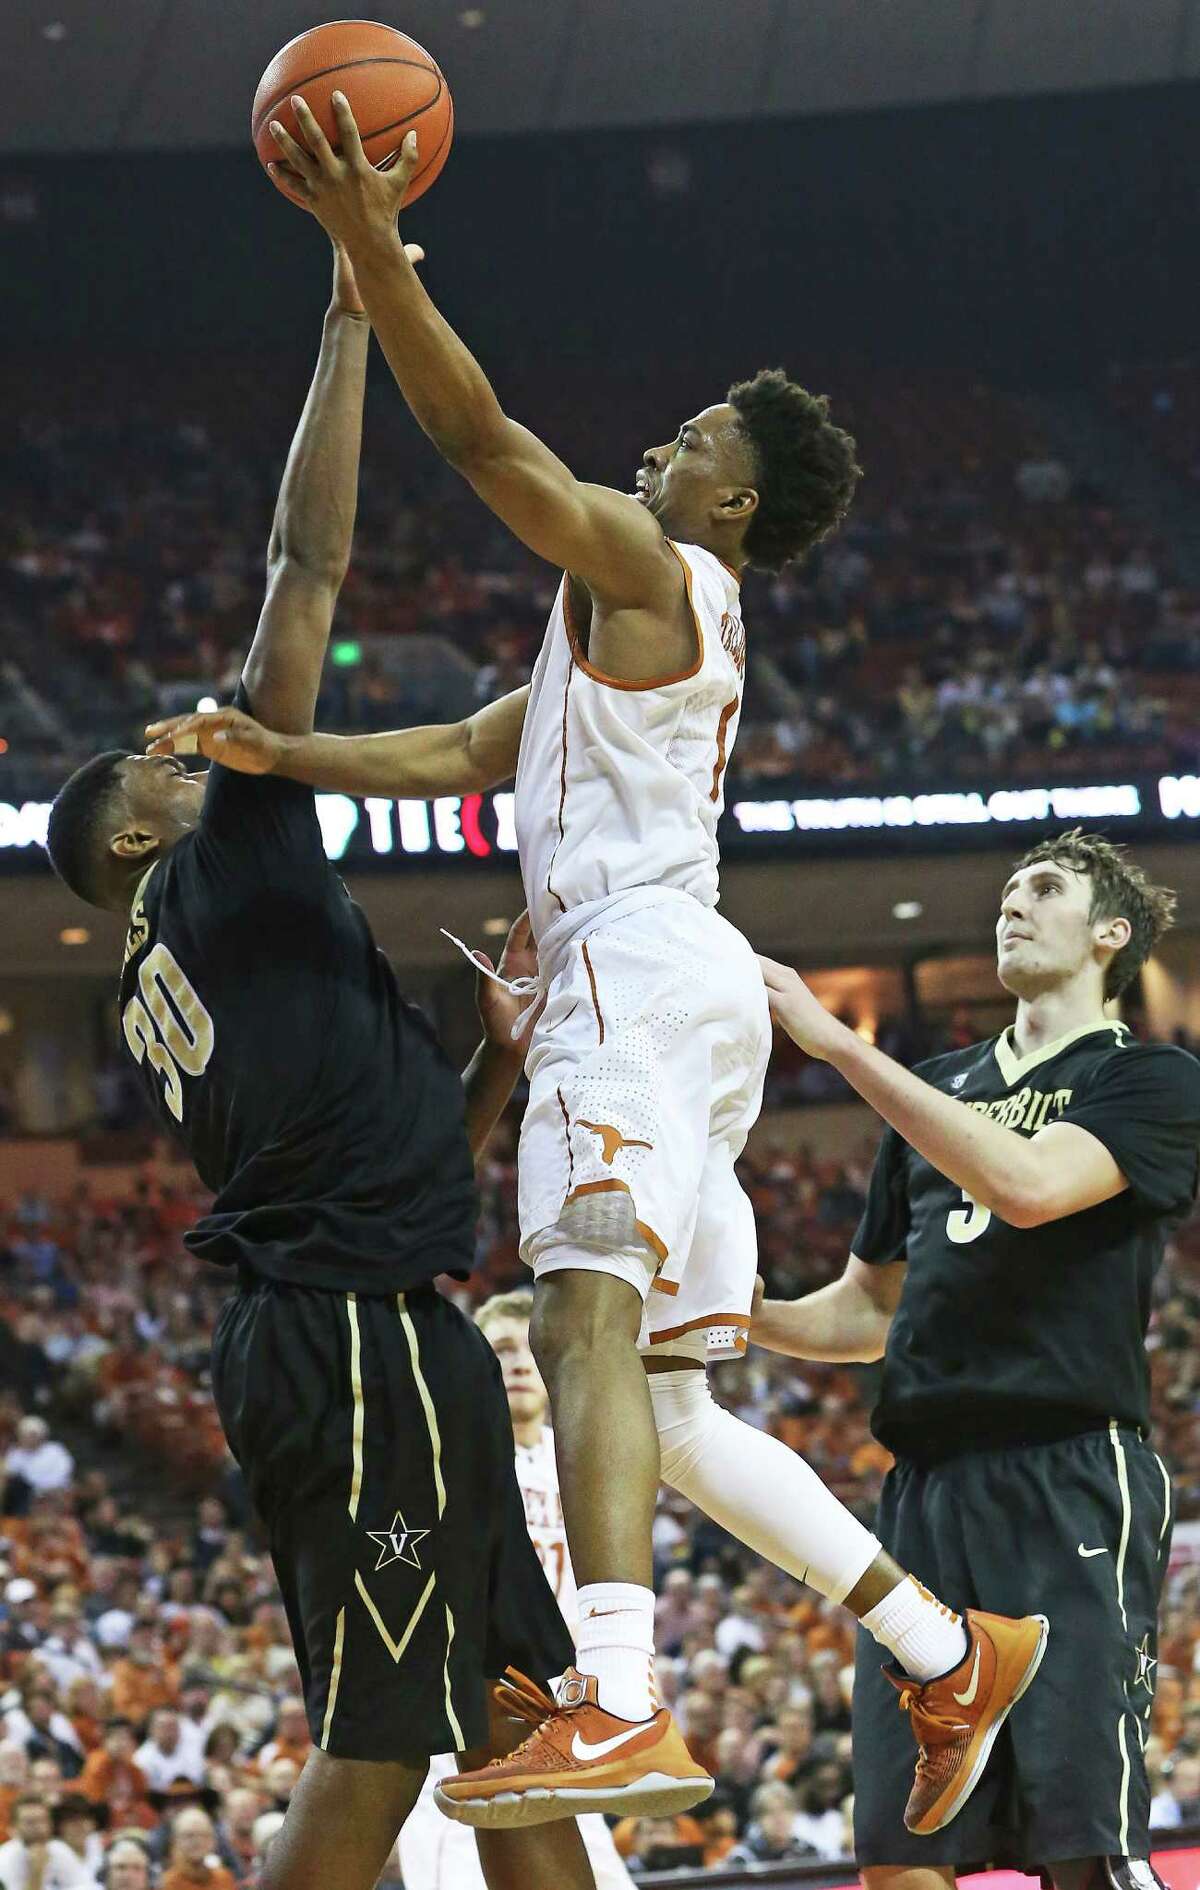 Isaiah Taylor flies into the rim for a score against Damian Jones as Texas hosts Vanderbilt at the Erwin Center in Austin on January 30, 2016.